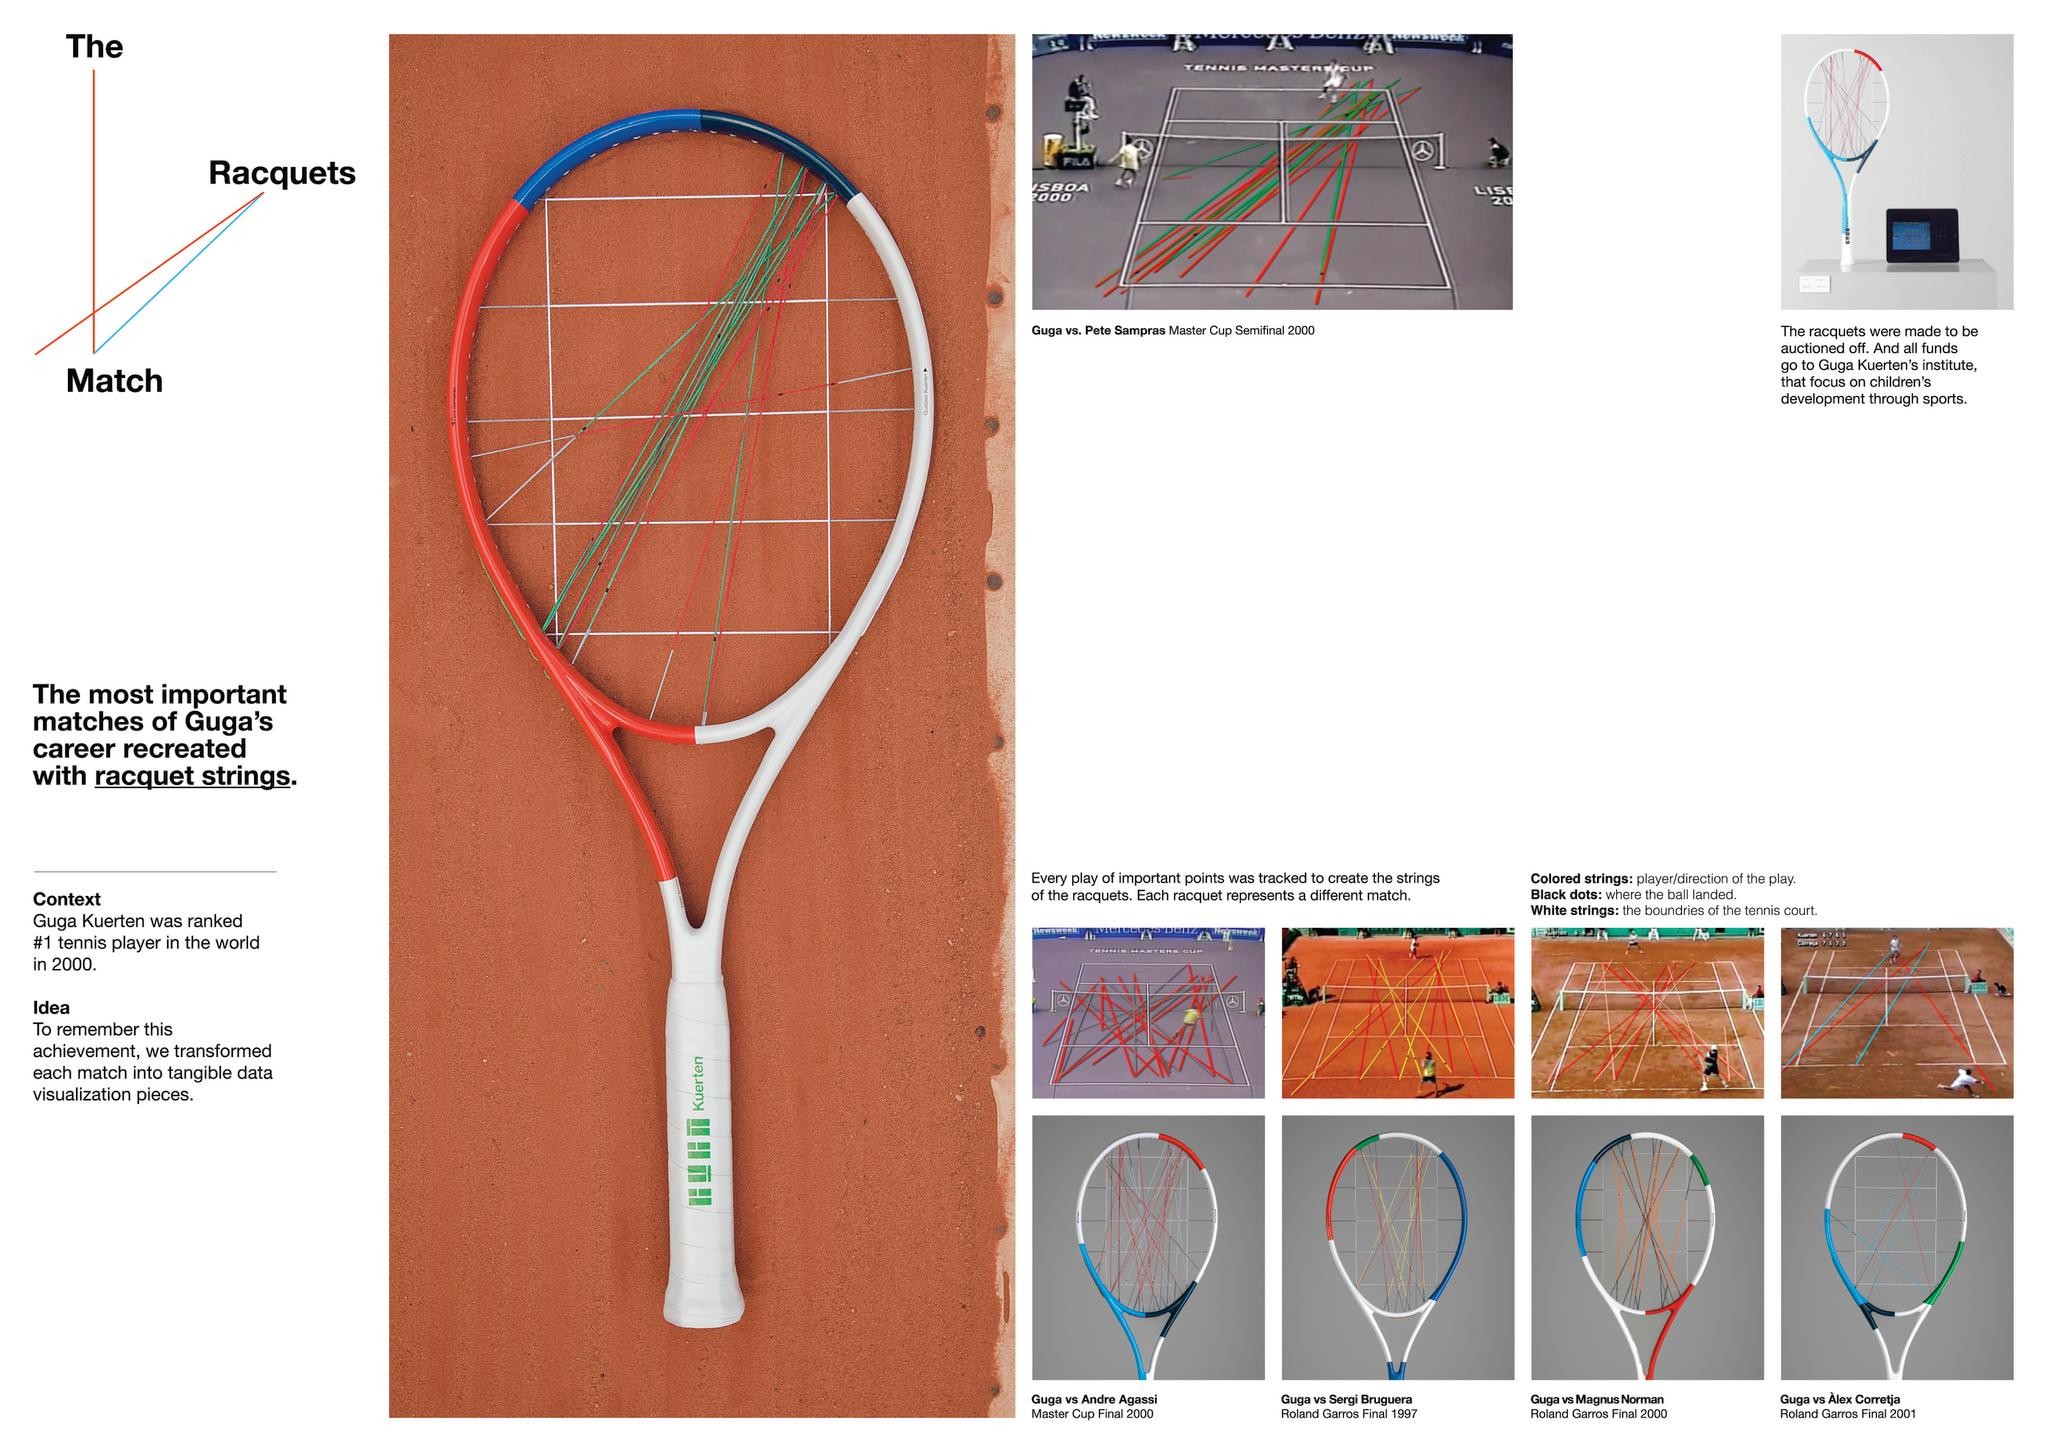 THE MATCH RACQUETS